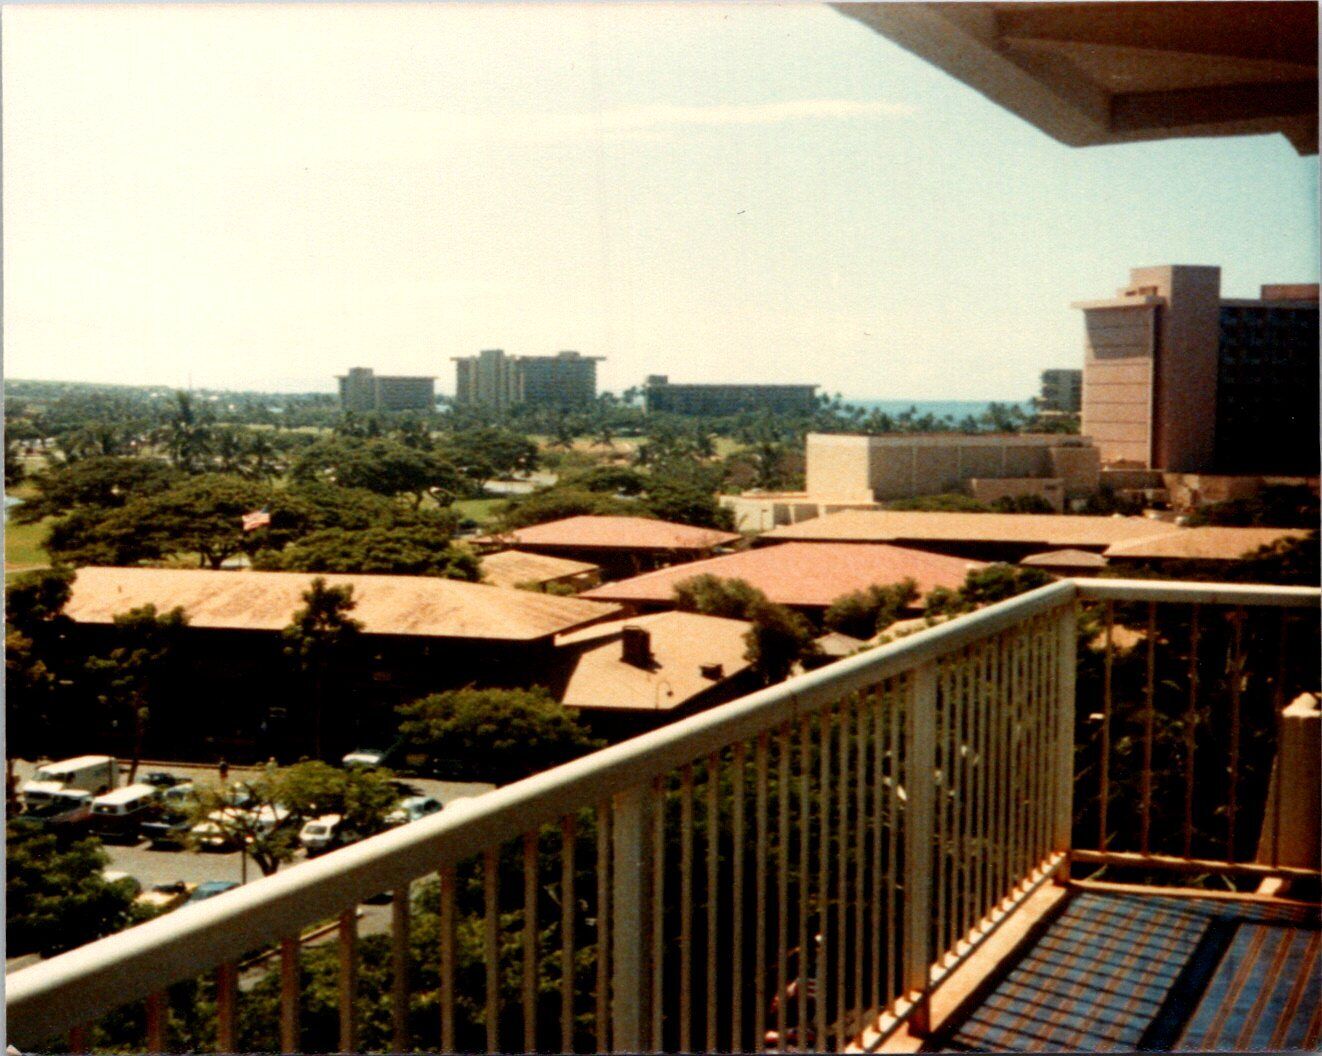 View of the city from balcony of hotel in Hawaii Found Photo V1243